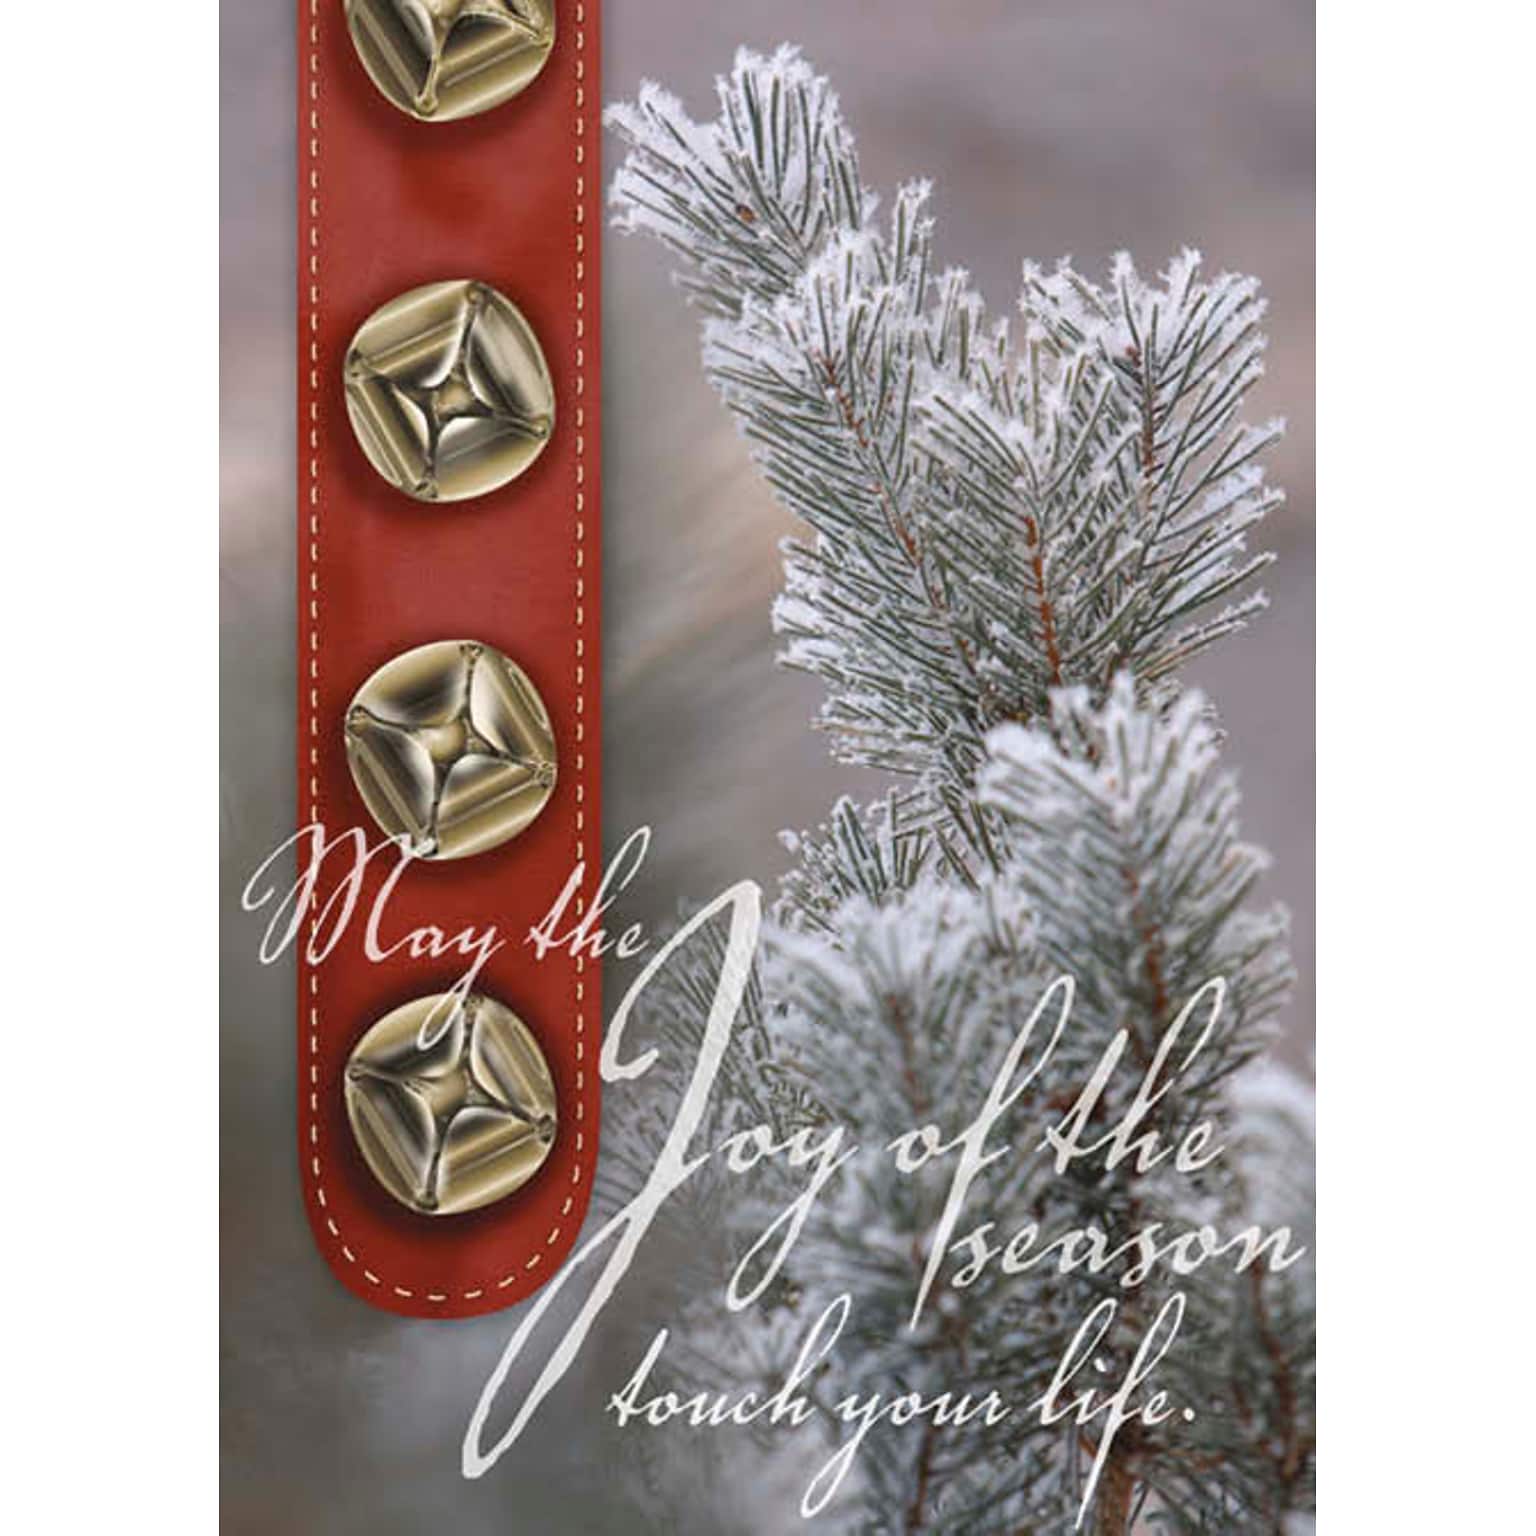 May The Joy Of The Season Touch Your Life Holiday Greeting Cards, With A7 Envelopes, 7 x 5, 25 Cards per Set